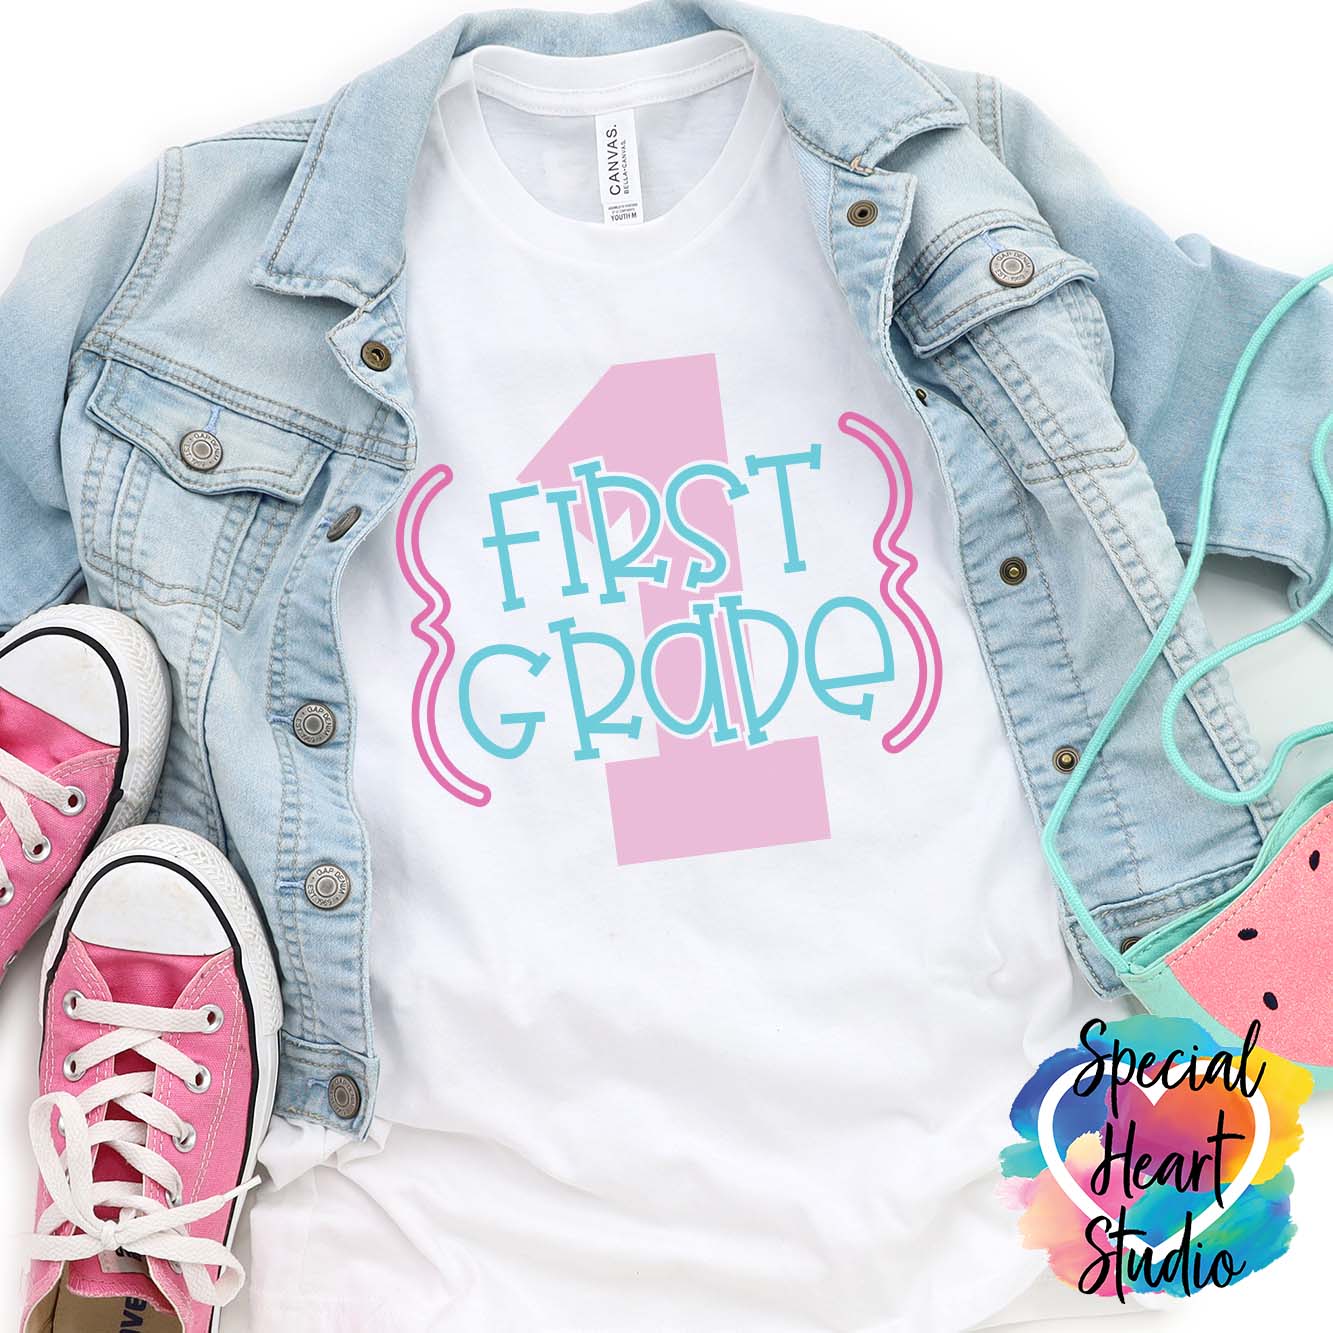 First Grade 1 SVG on white shirt mockup with jean jacket